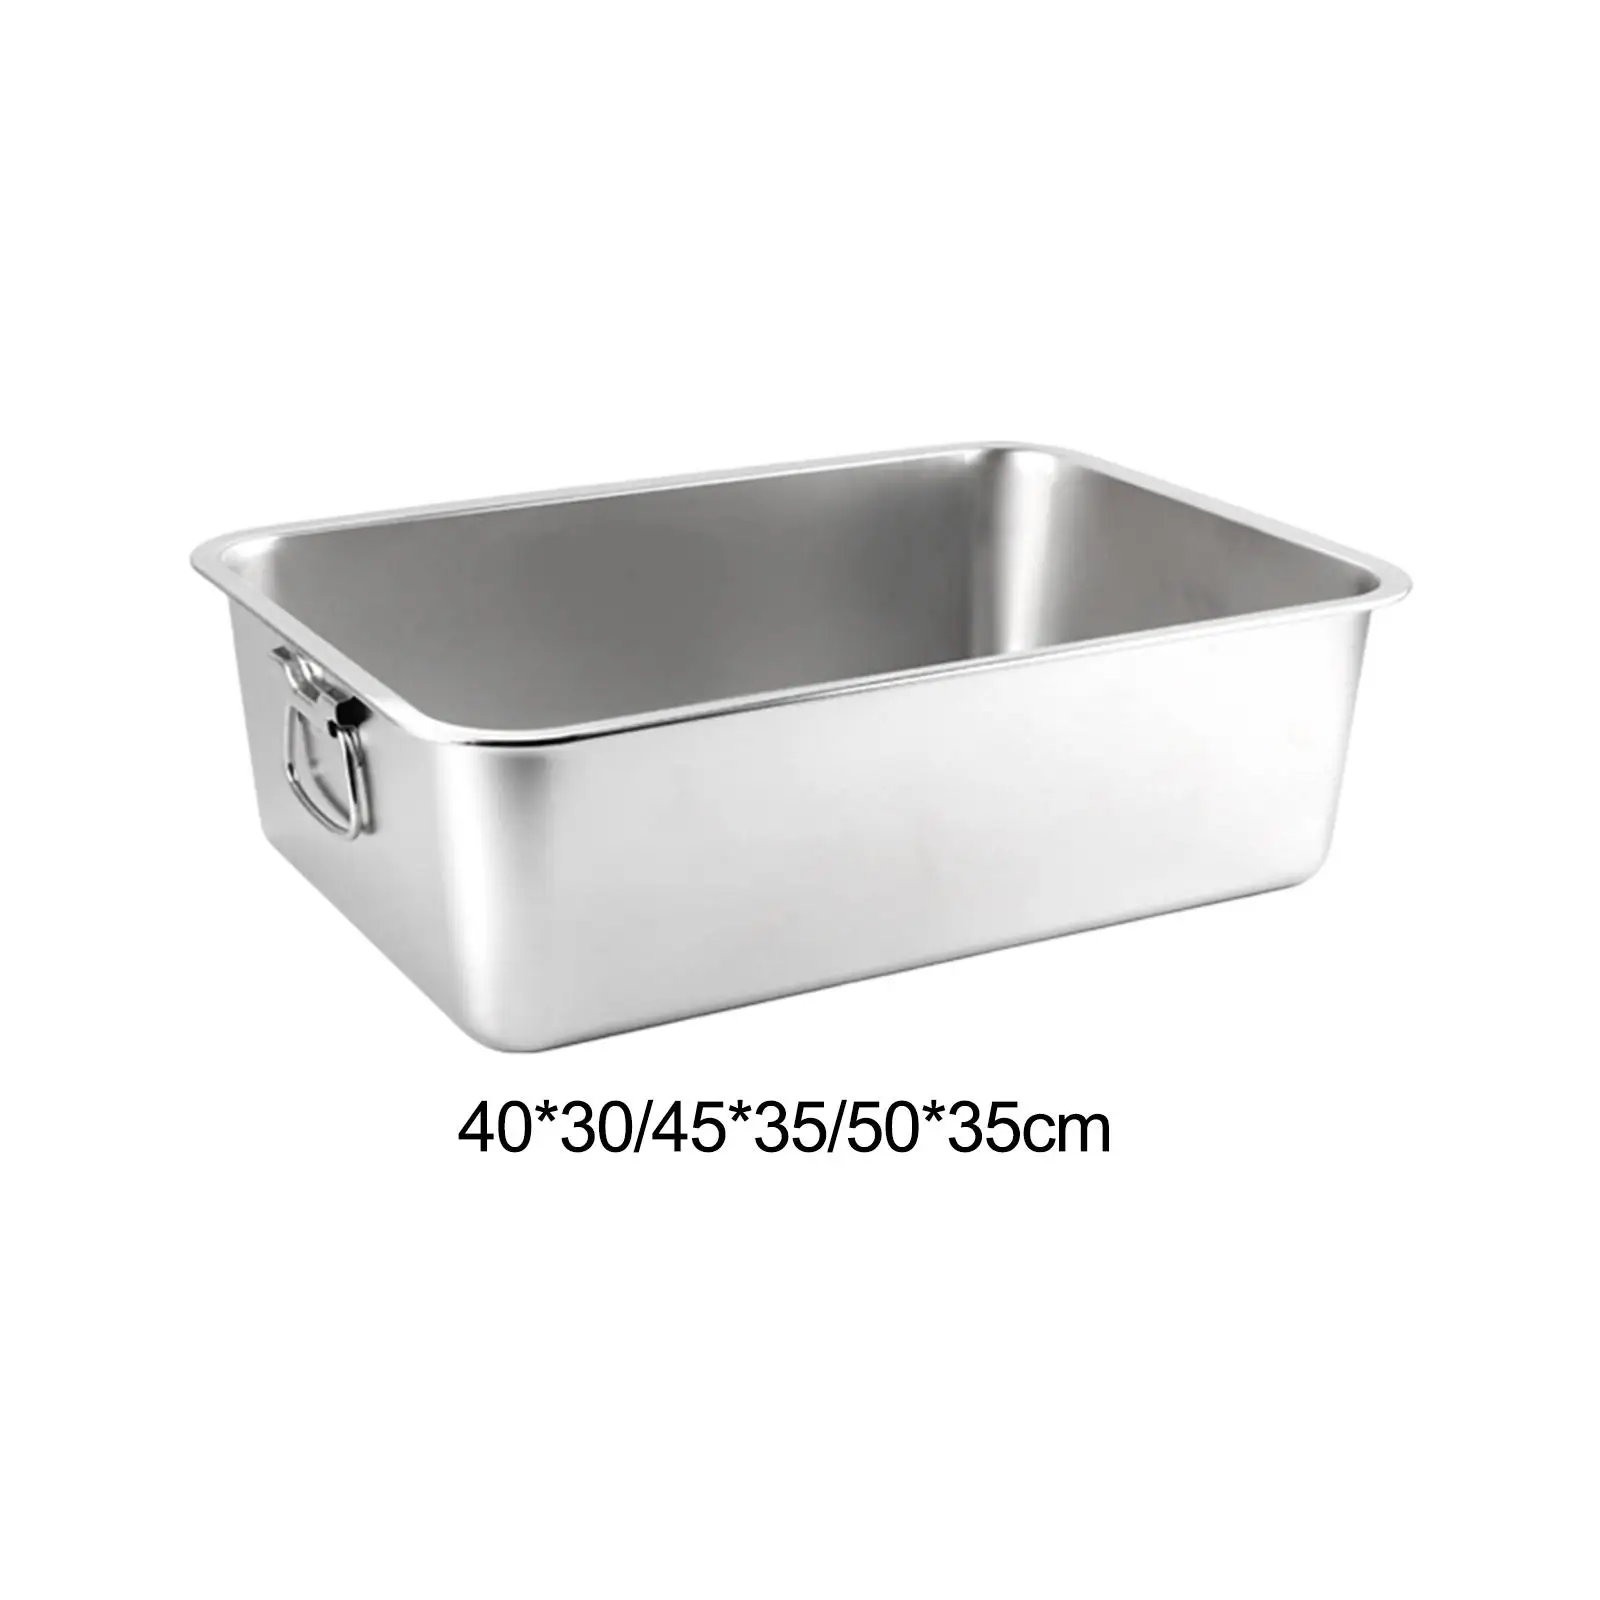 Open Top Pet Cat Litter Box Stainless Steel Potty Toilet Easy Cleaning Pet Supplies Cat Sandbox for Single & Multi Cat Homes